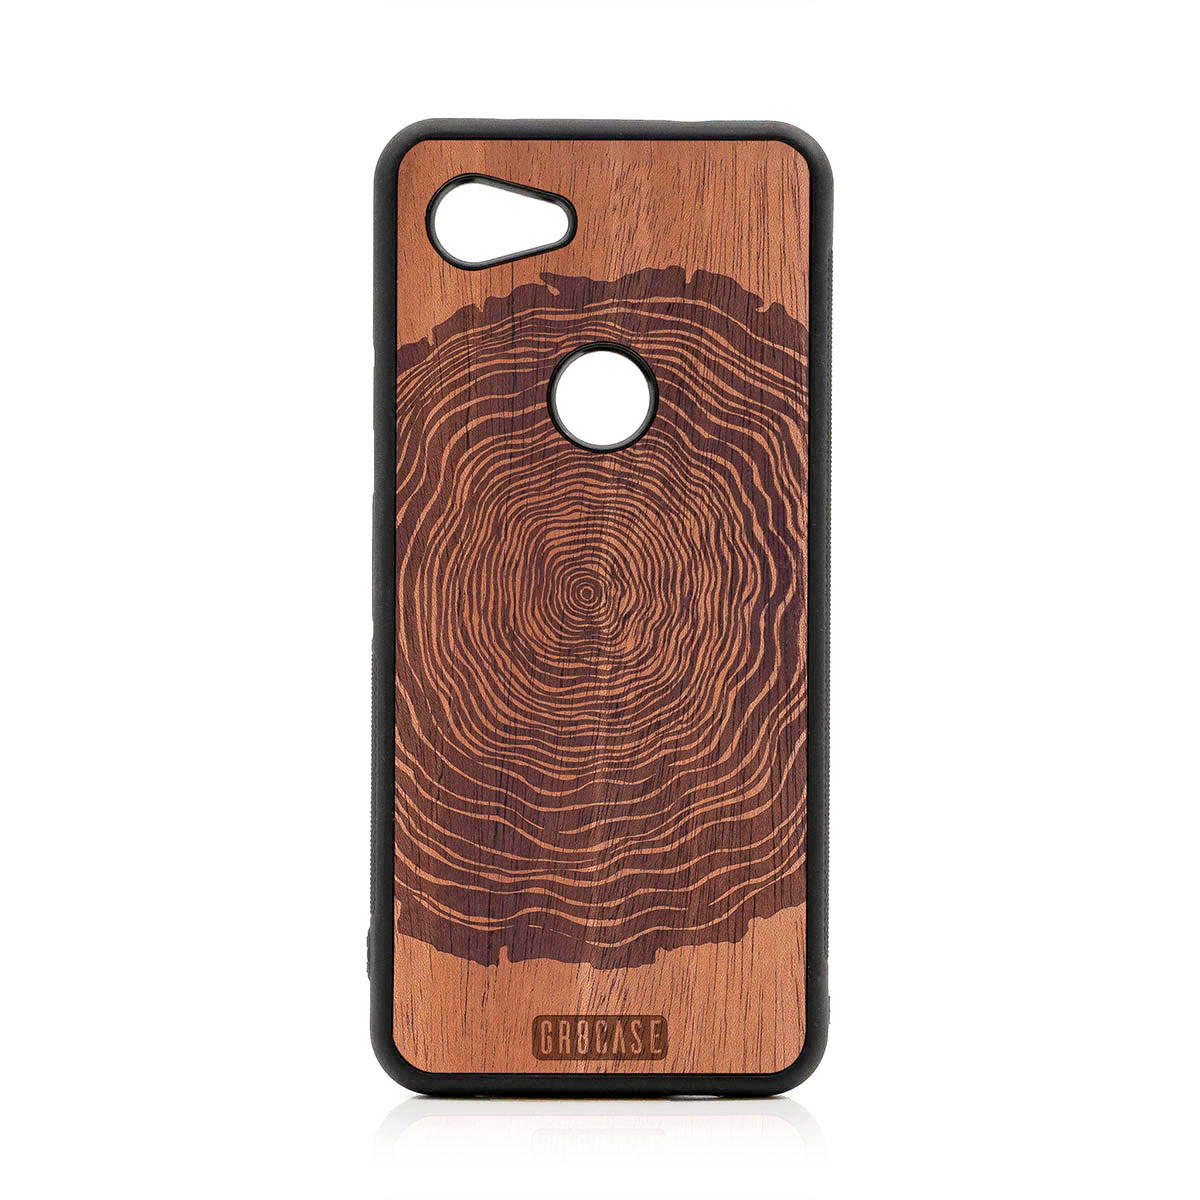 Tree Rings Design Wood Case For Google Pixel 3A XL